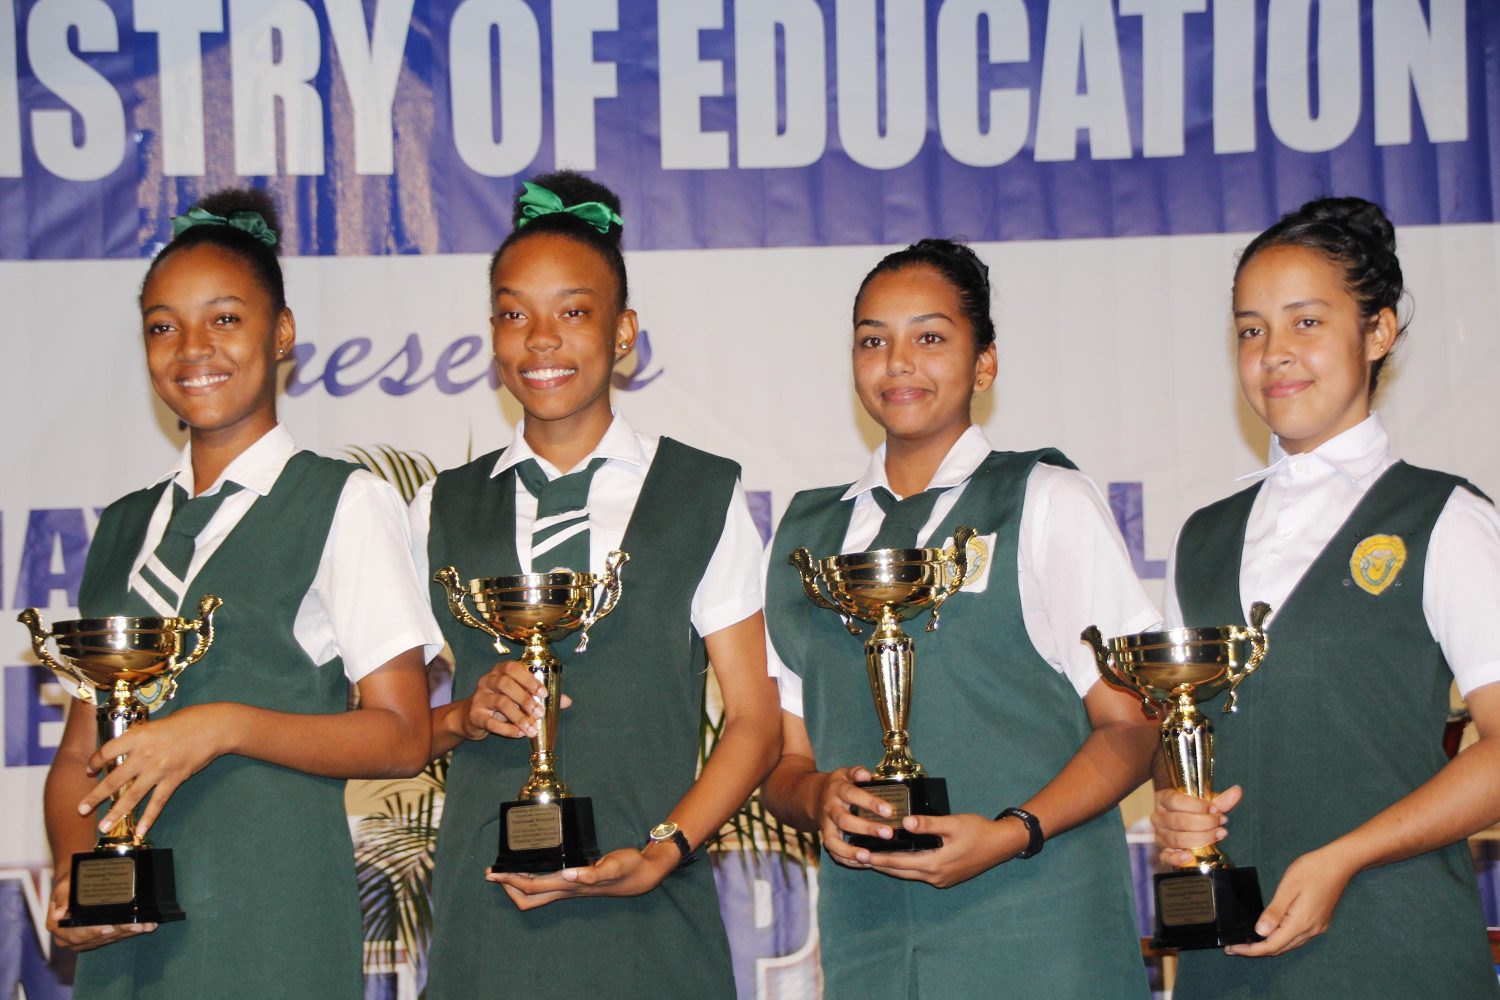 The winning team: From right to left Anzale Gonsalves (standby), Amabel Campbell, Tenisha Evelyn and Aaliah Corlette. (Ministry of Education photo)